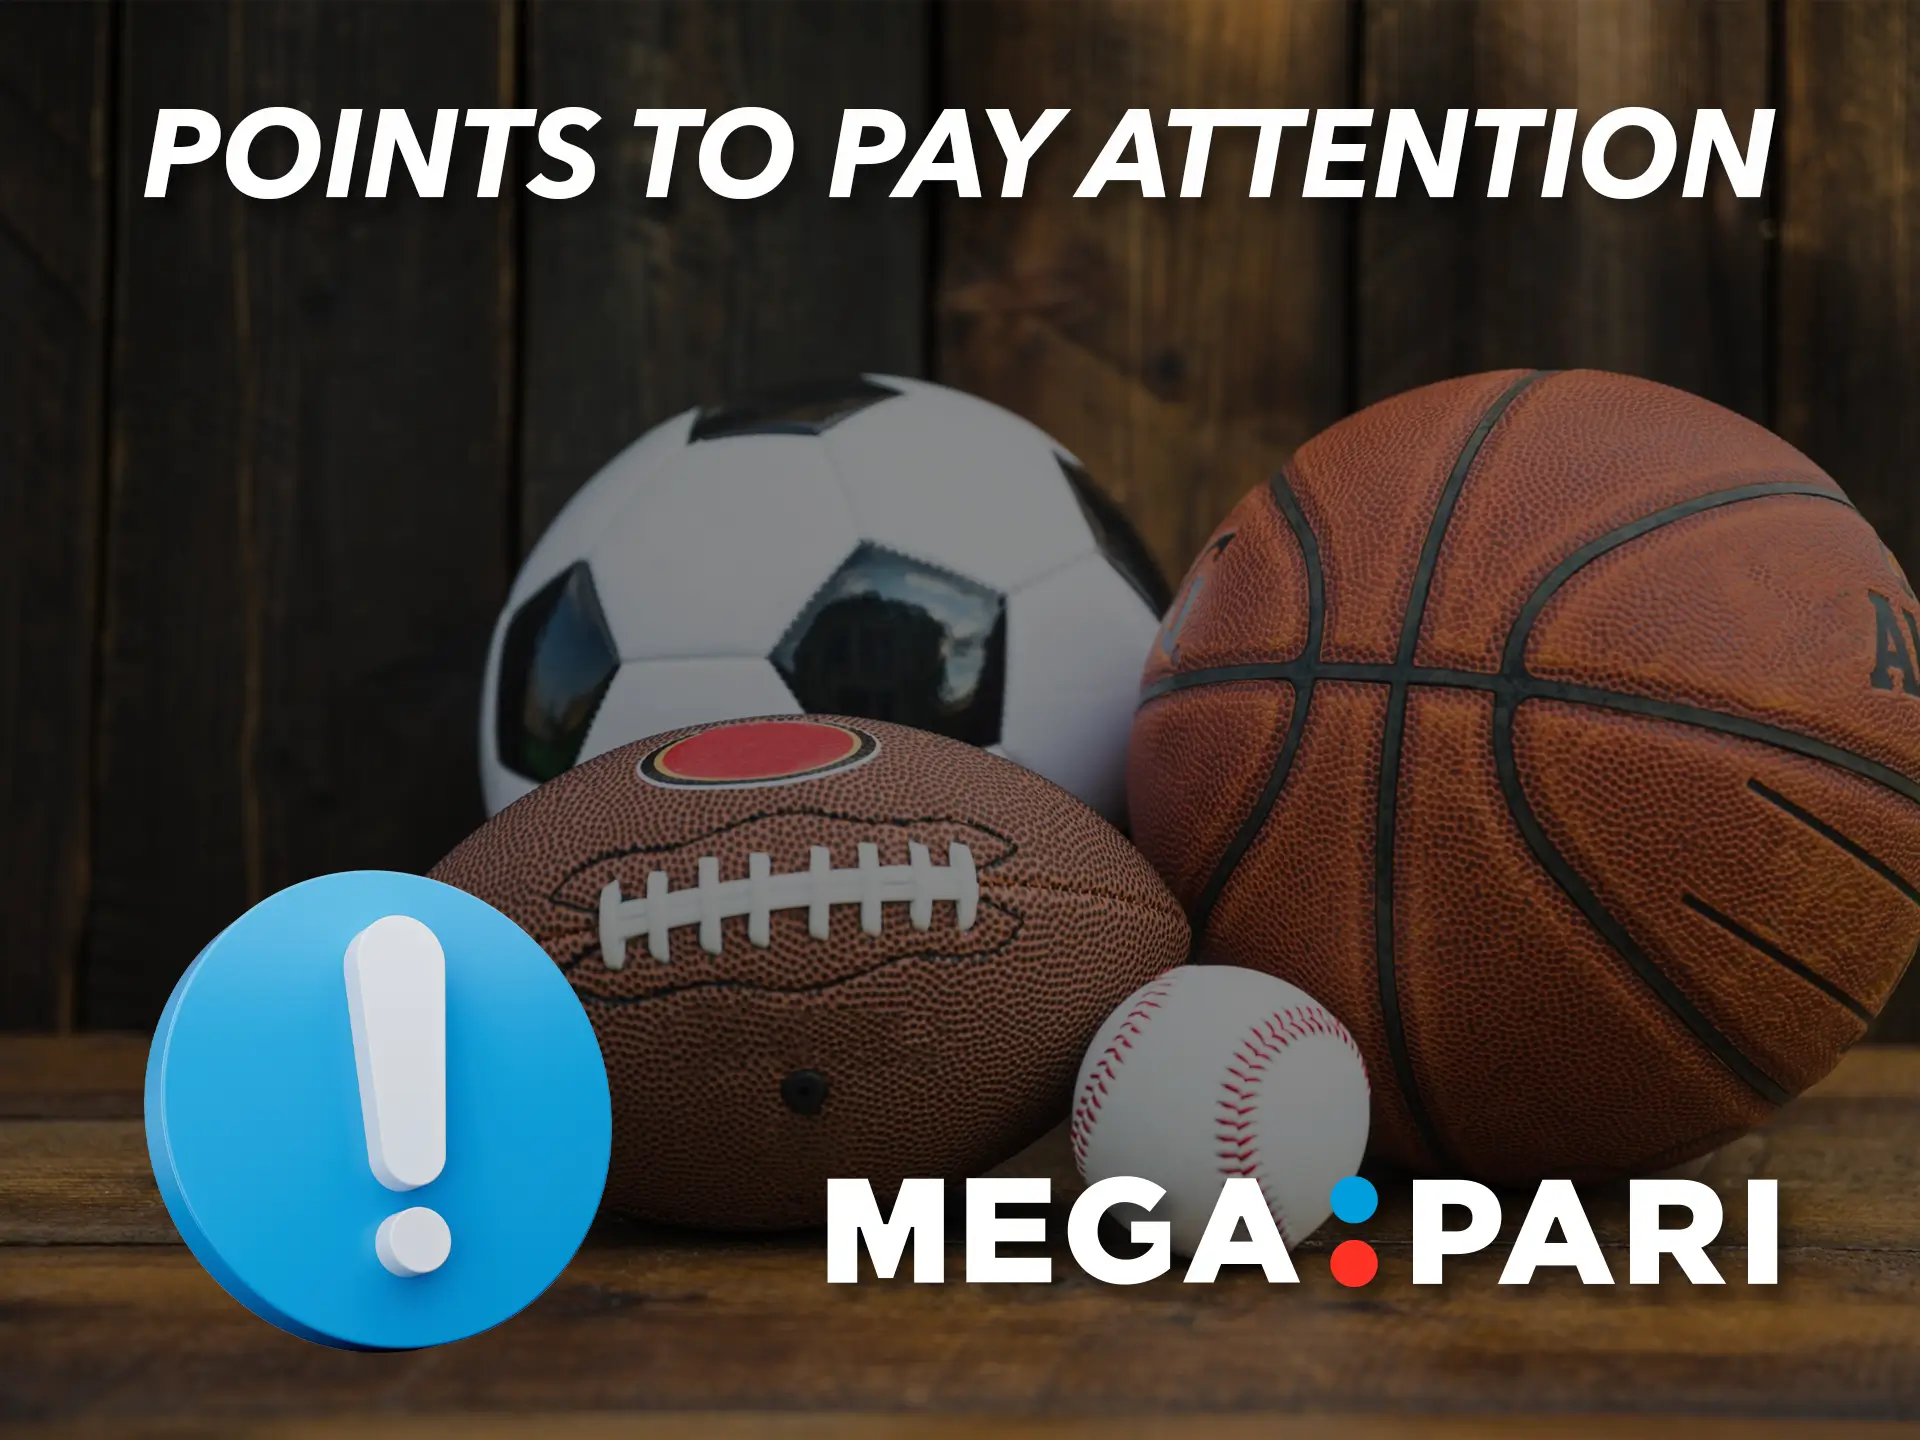 Pay attention to the deposit and withdrawal limits at Megapari.